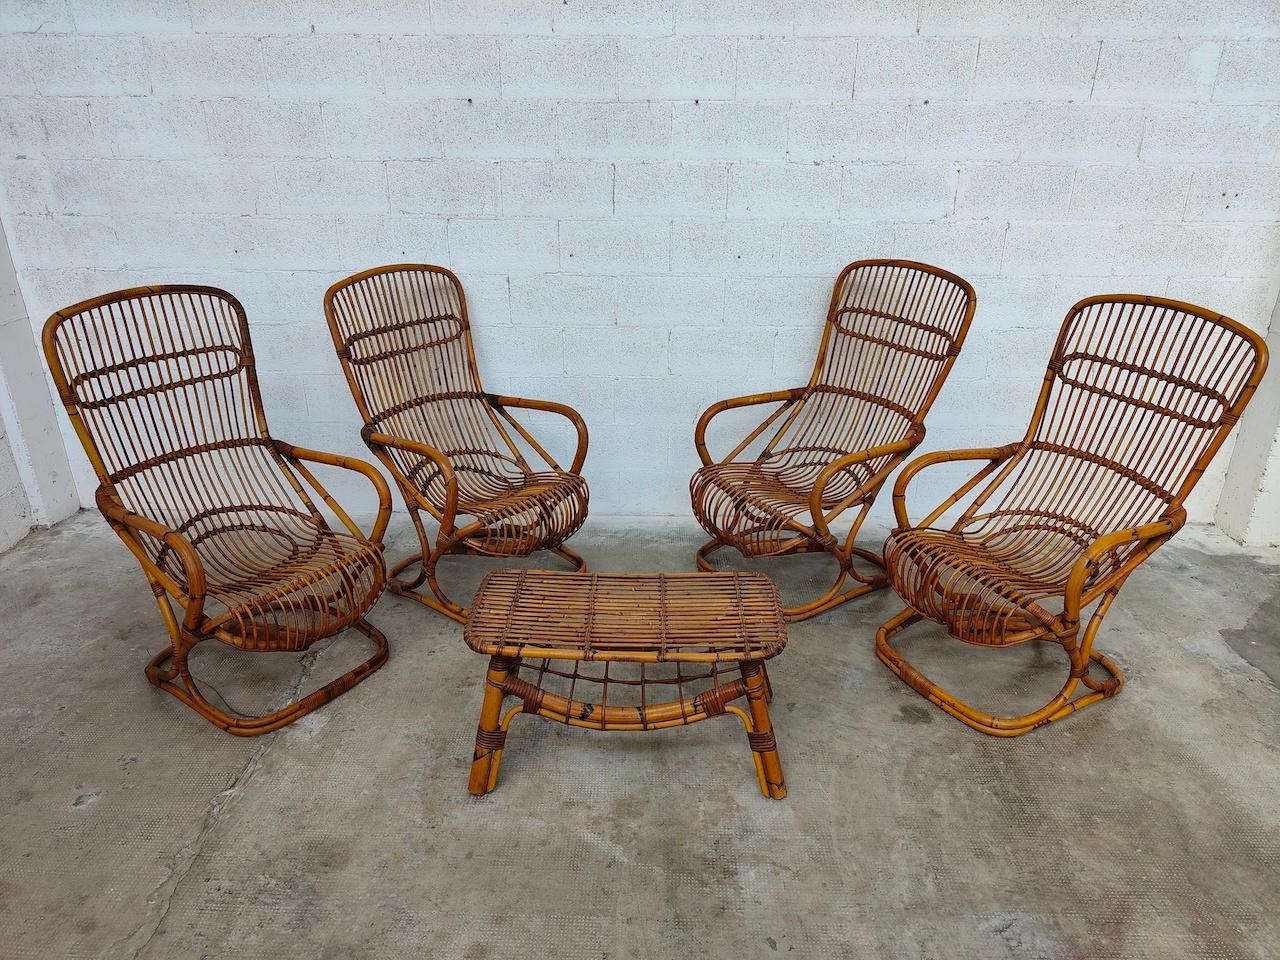 Set of 4 armchairs and a coffee table in wicker bamboo rattan and natural rattan.
This beautiful set is in excellent condition in all its parts and carries some traces of time that make it even more warm and fascinating.
Perfect for the outdoors,